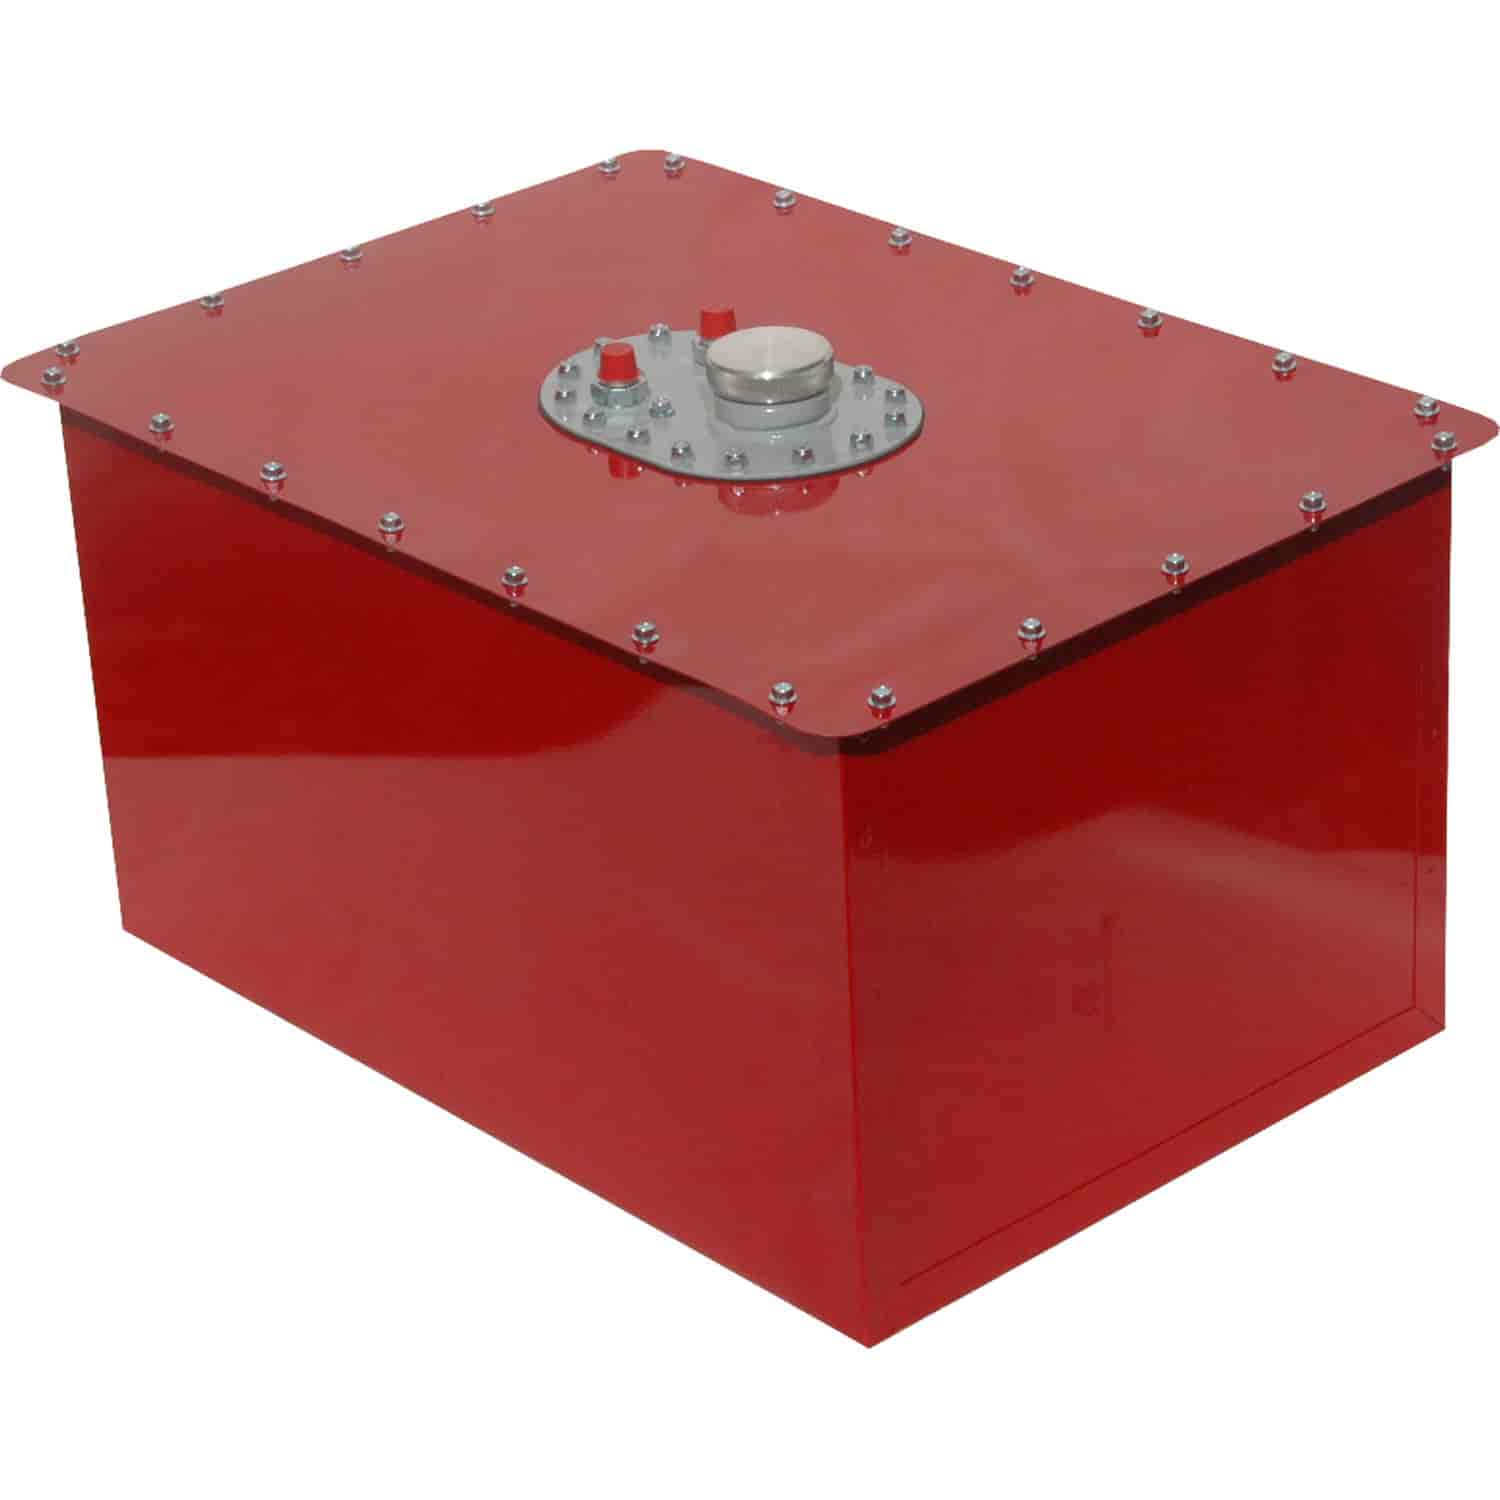 Circle Track Fuel Cell Capacity: 22-Gallon - Red Powder-Coated Finish